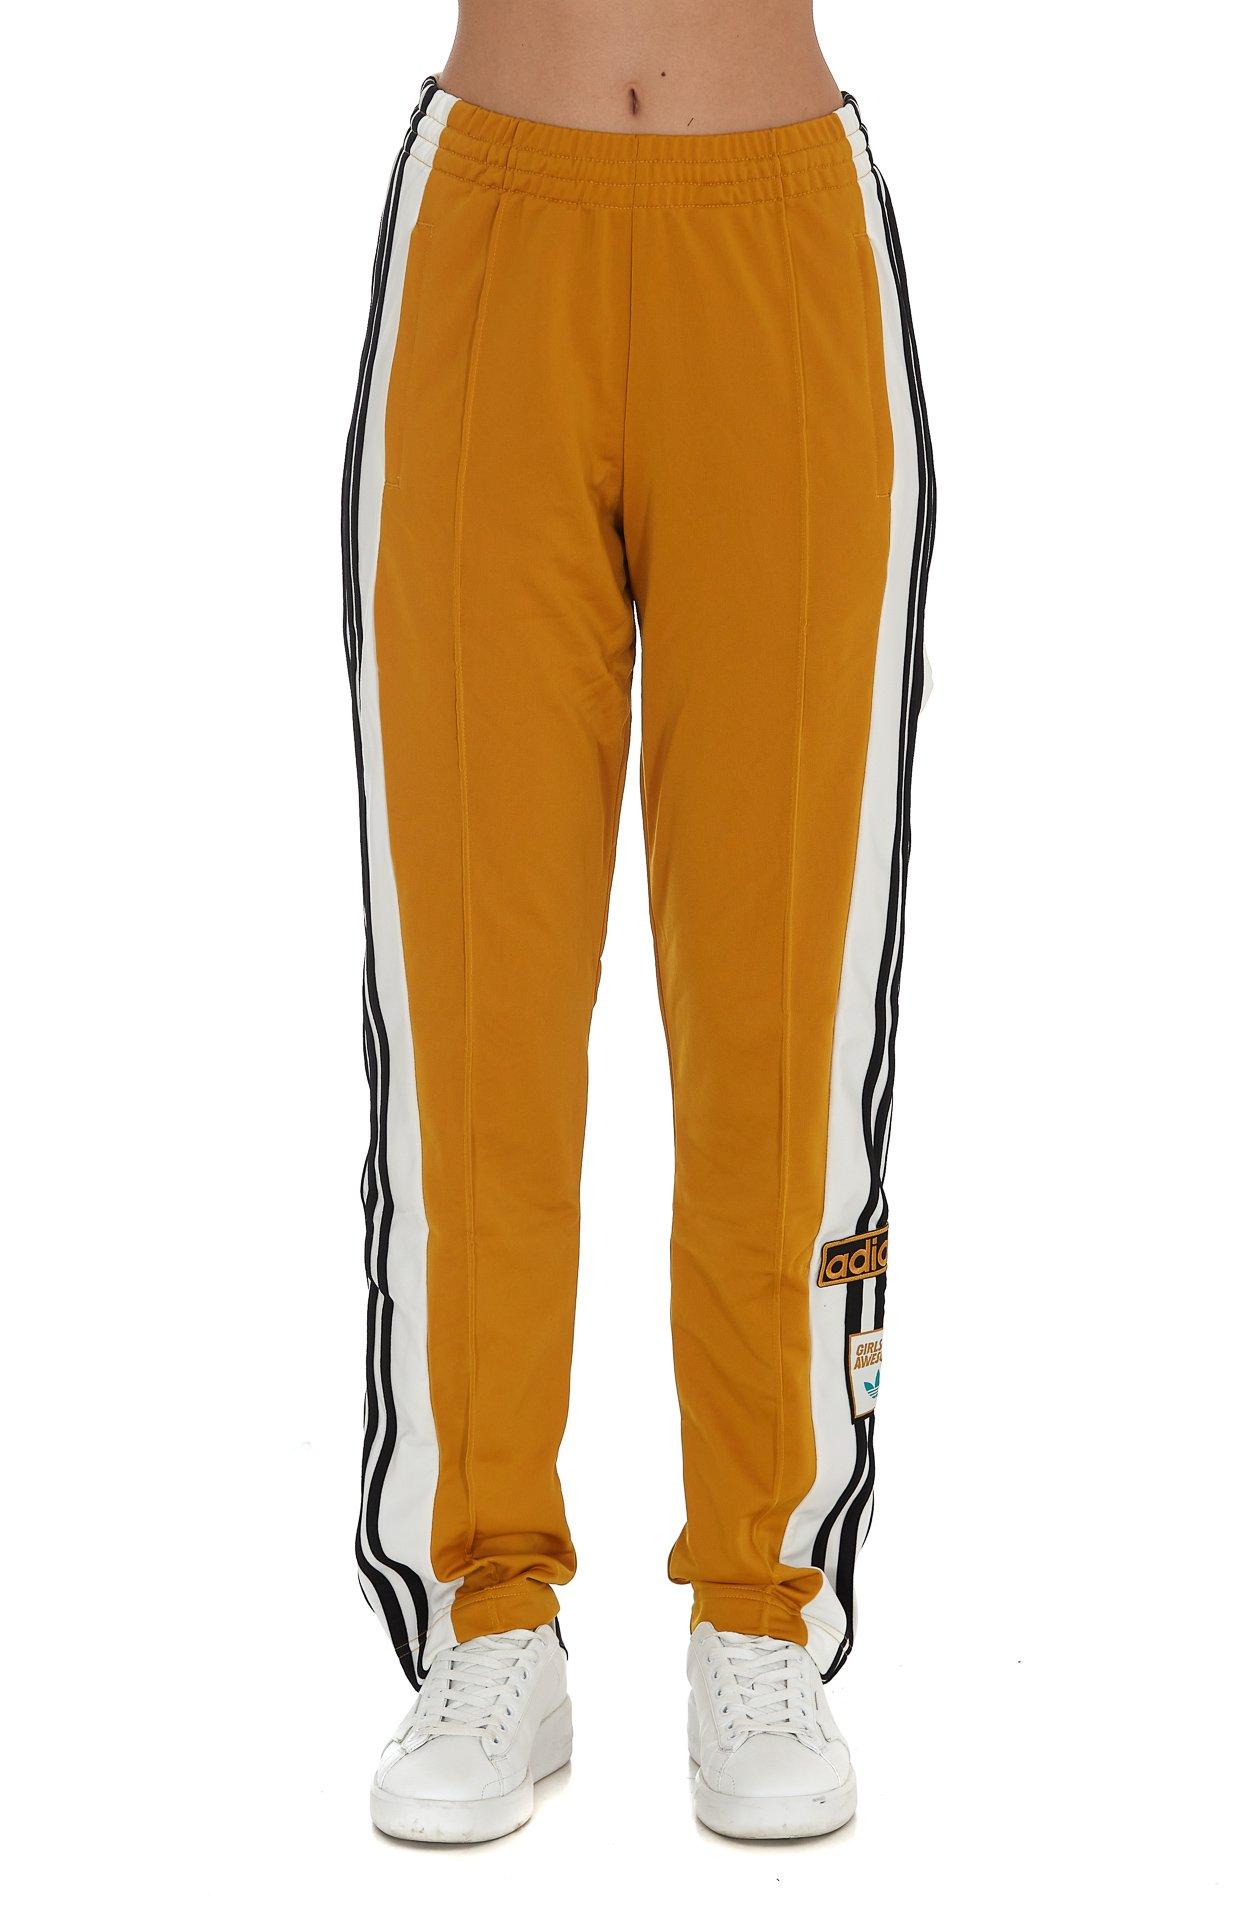 adidas Originals Synthetic Girls Are Awesome Adibreak Pants in Yellow | Lyst